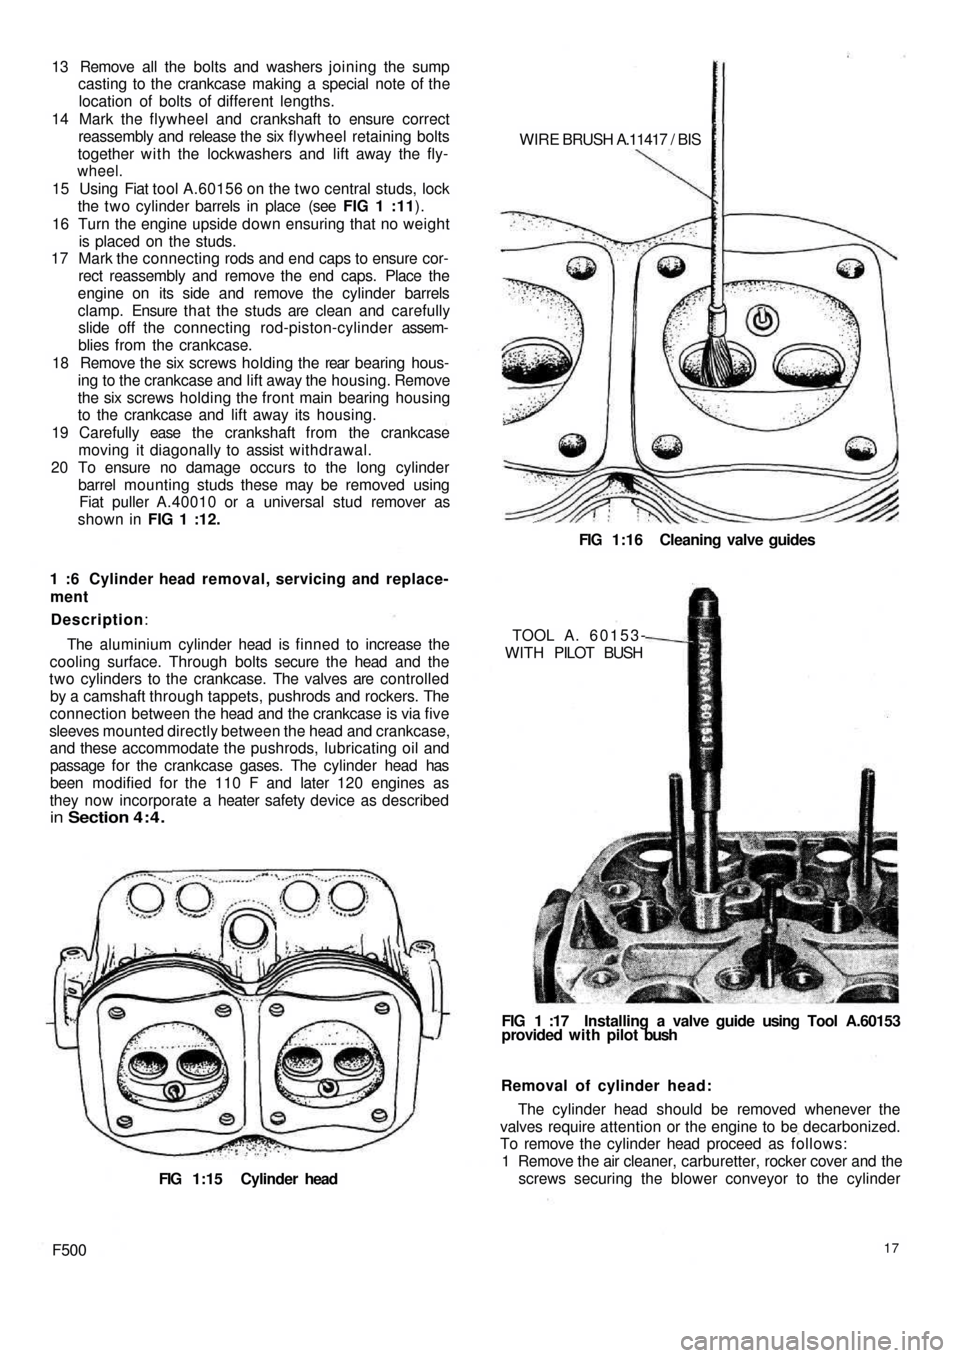 FIAT 500 1961 1.G Workshop Manual 13  Remove all the bolts and washers joining the sump
casting to the crankcase making a special note of the
location of bolts of different lengths.
14 Mark the flywheel and crankshaft to ensure correc